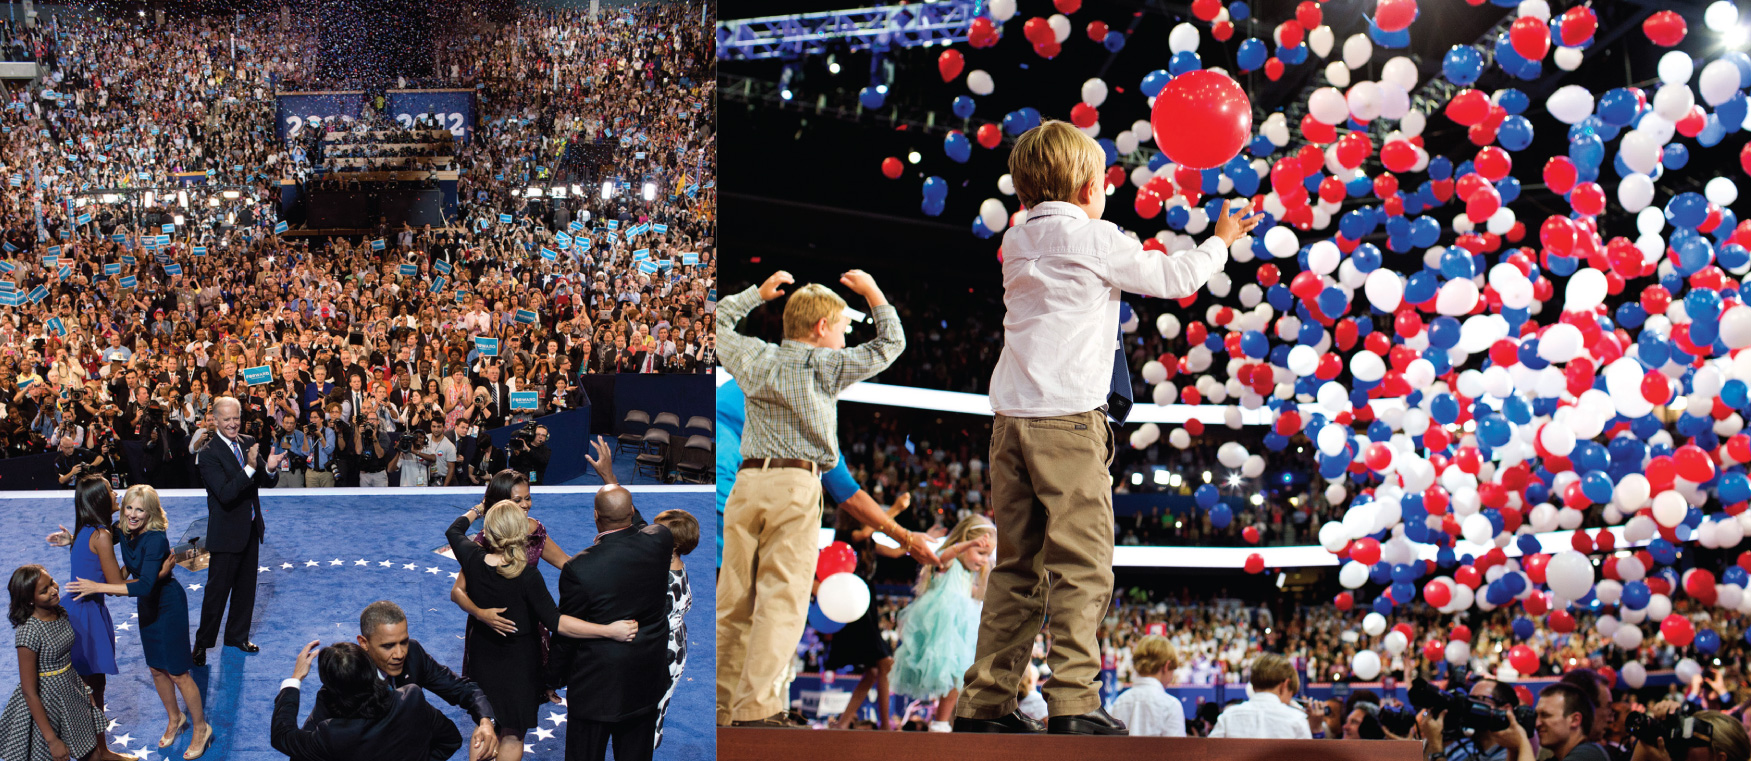 The image on the left is of Obama and his family in front of a large crowd of people. The image on the right is of several children on a stage in front of a large crowd of people.